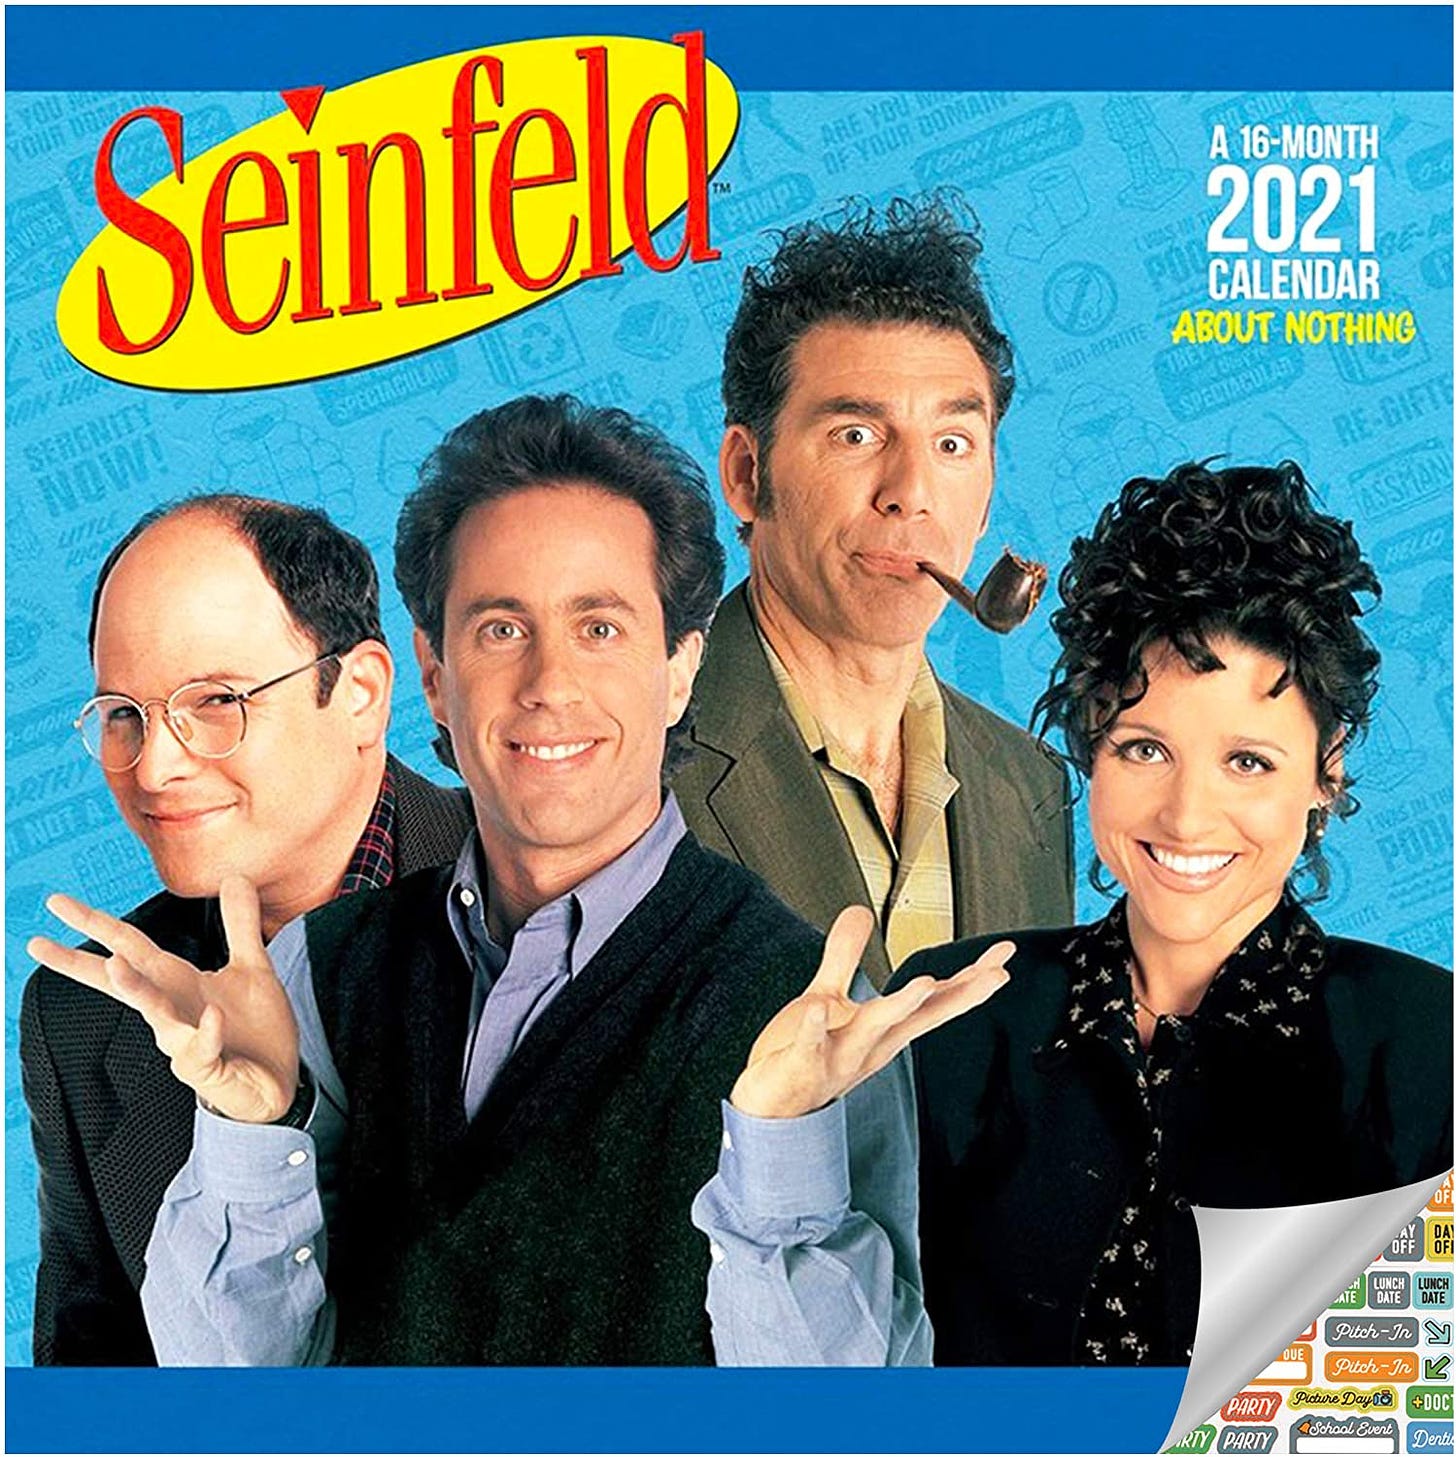 Those dicks from Seinfeld looking like a bunch of dicks.